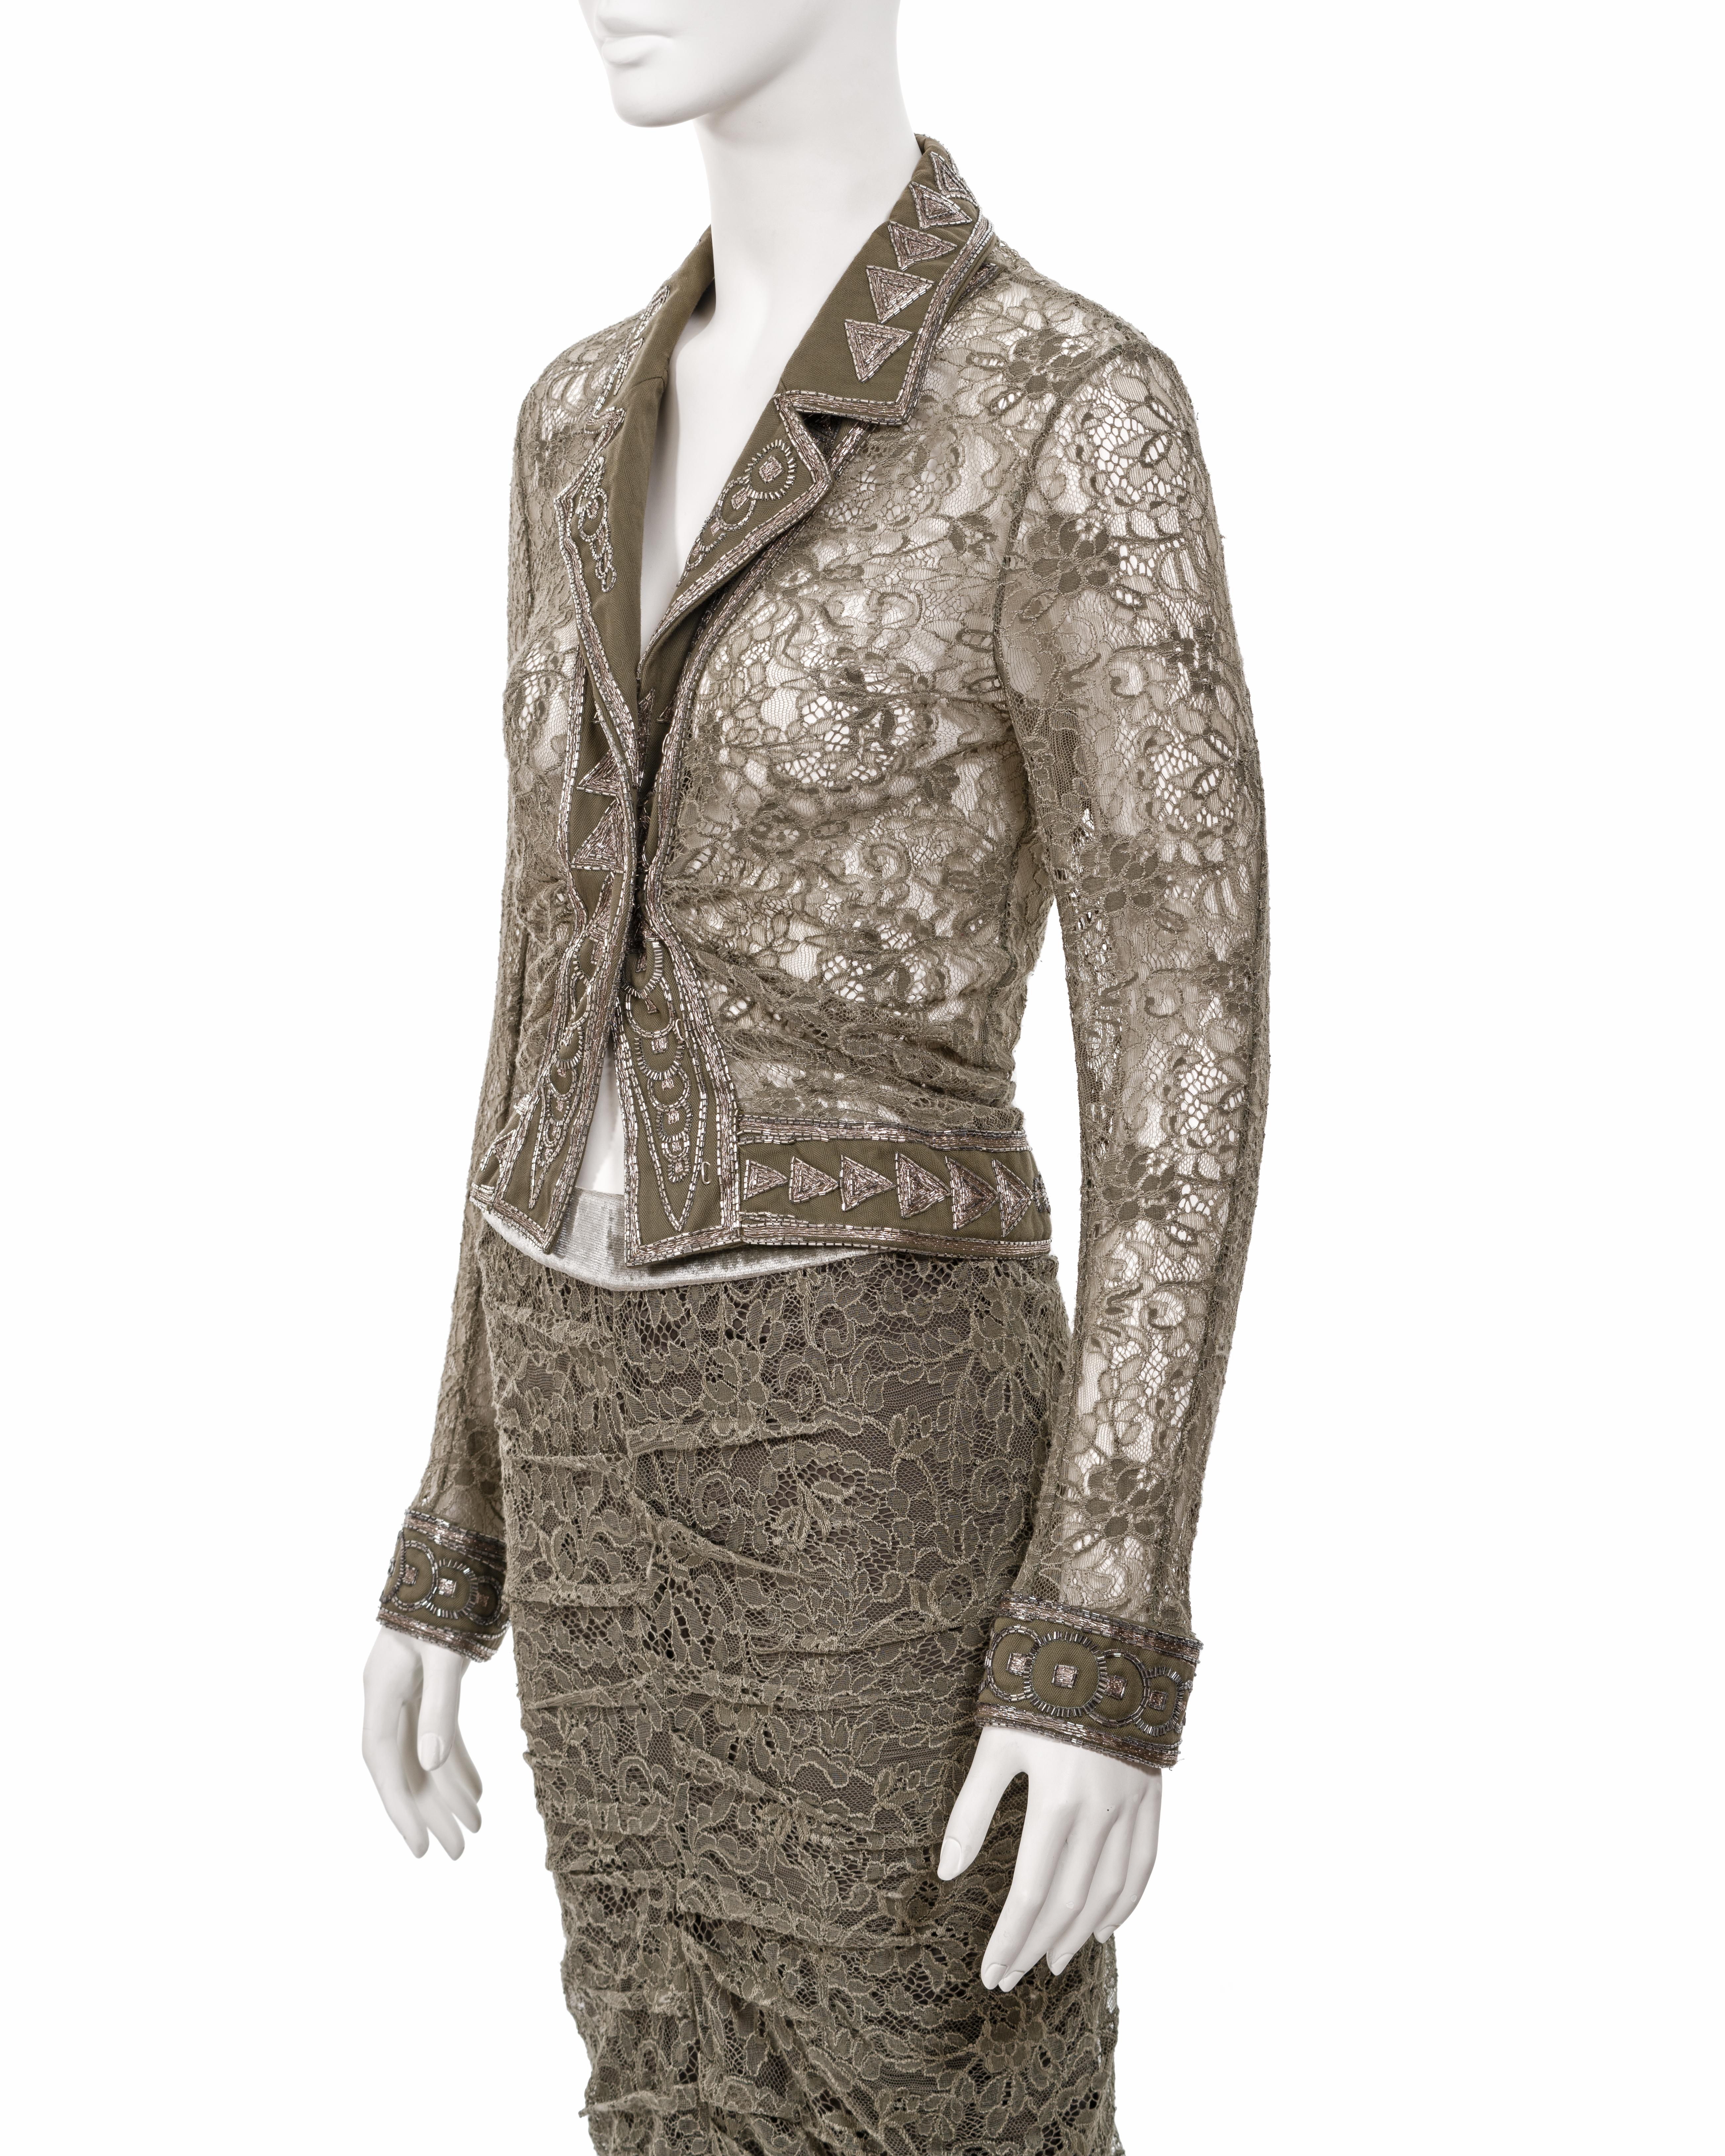 Christian Dior by John Galliano green lace beaded skirt suit, fw 2003 For Sale 3